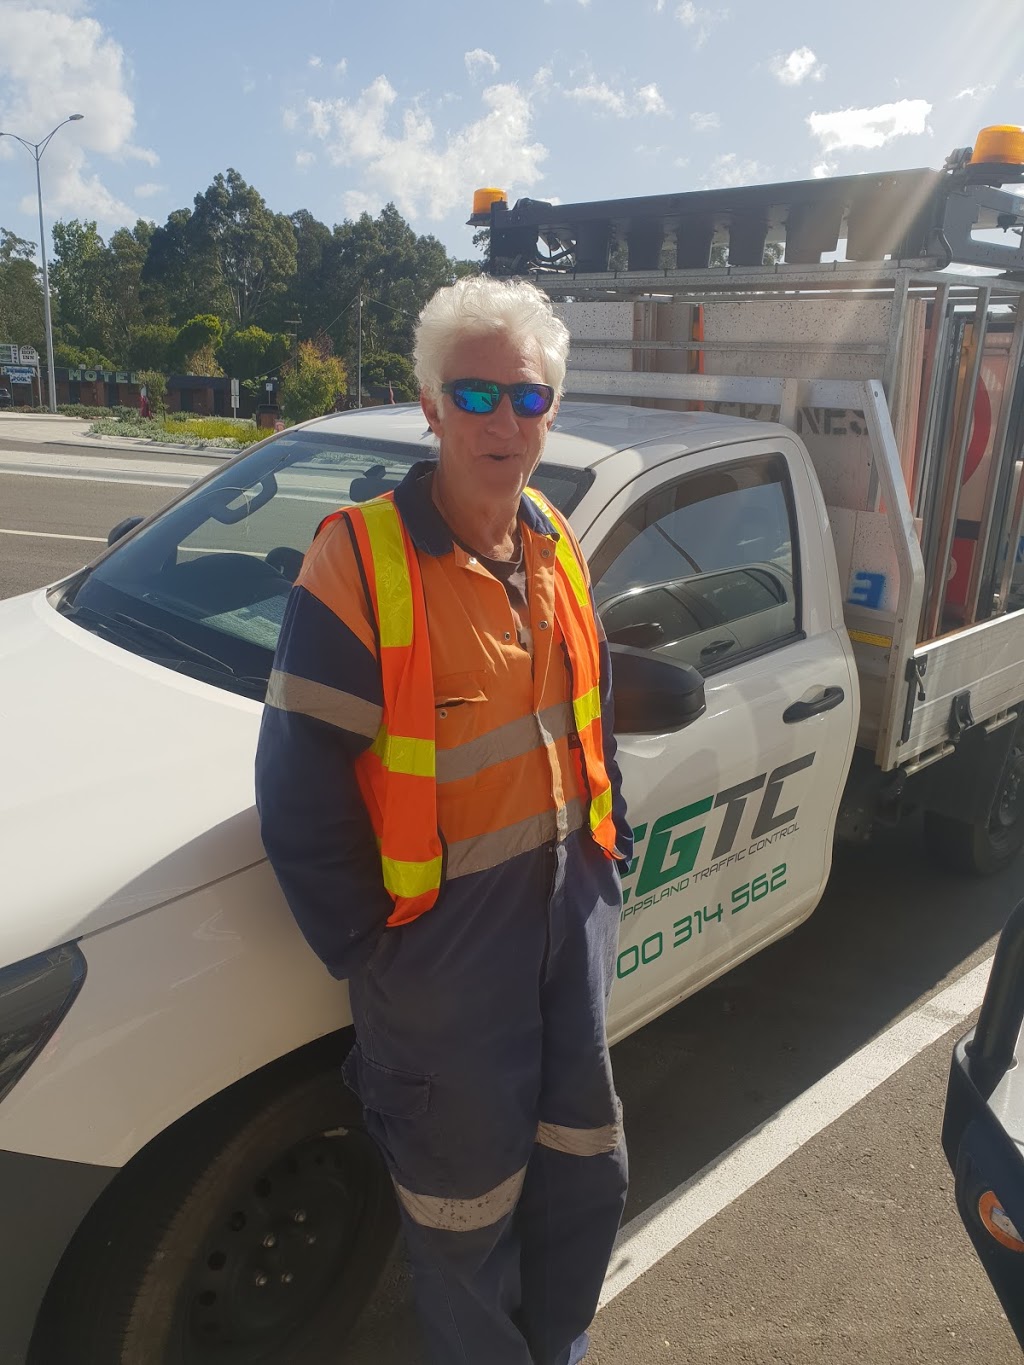 East Gippsland Traffic Control |  | 82 McMillan St, Lucknow VIC 3875, Australia | 1800314562 OR +61 1800 314 562